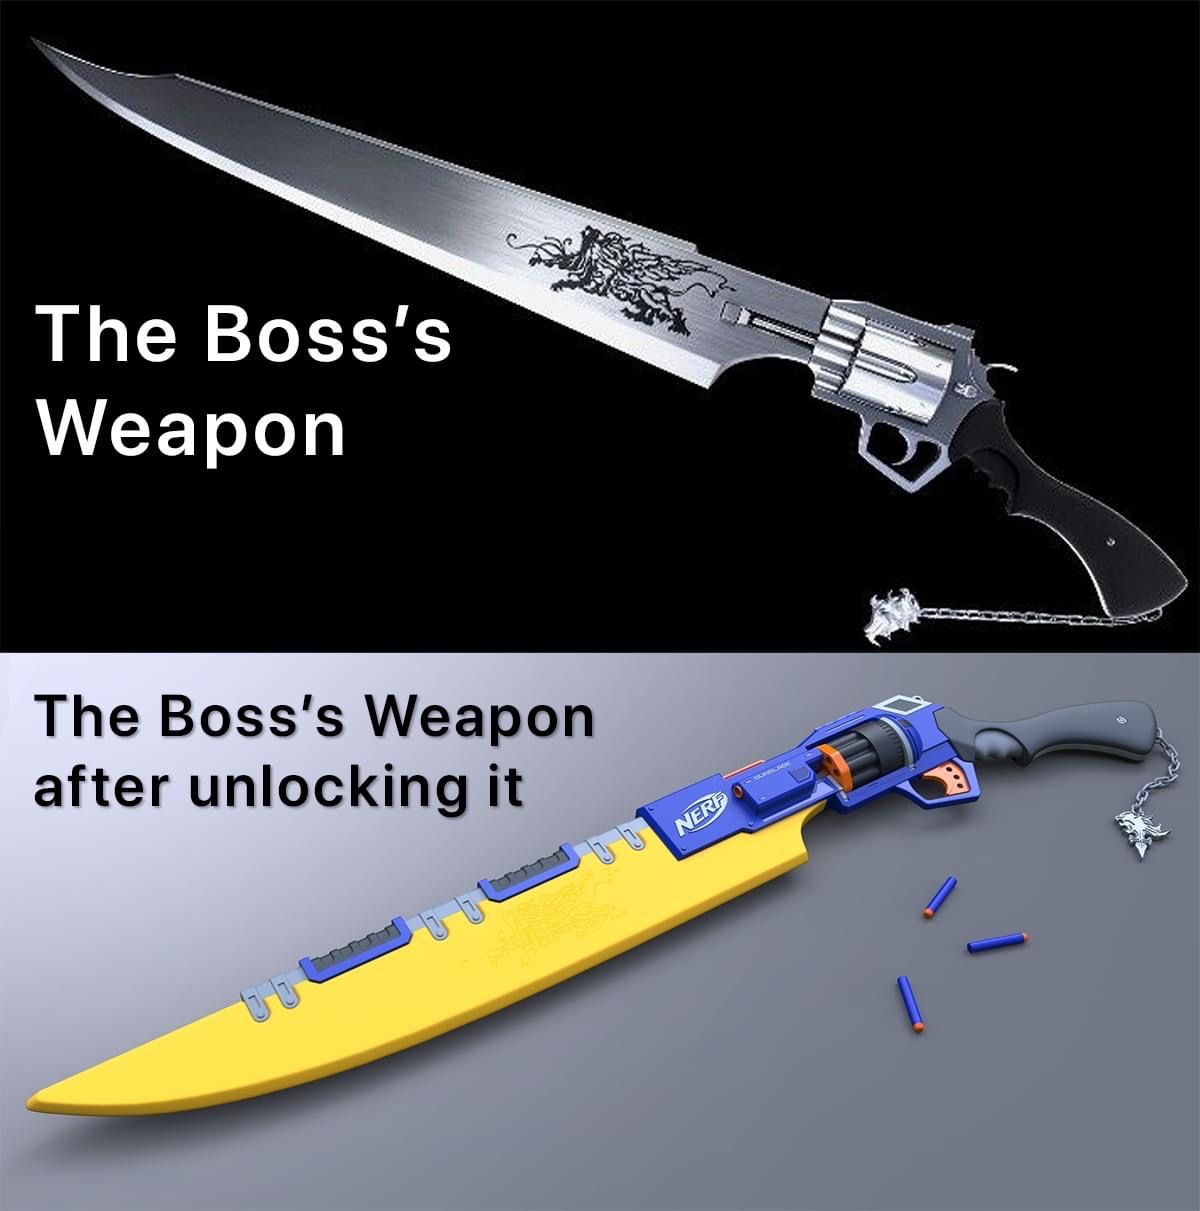 funny gaming memes - Internet meme - The Boss's Weapon The Boss's Weapon after unlocking it Nerf